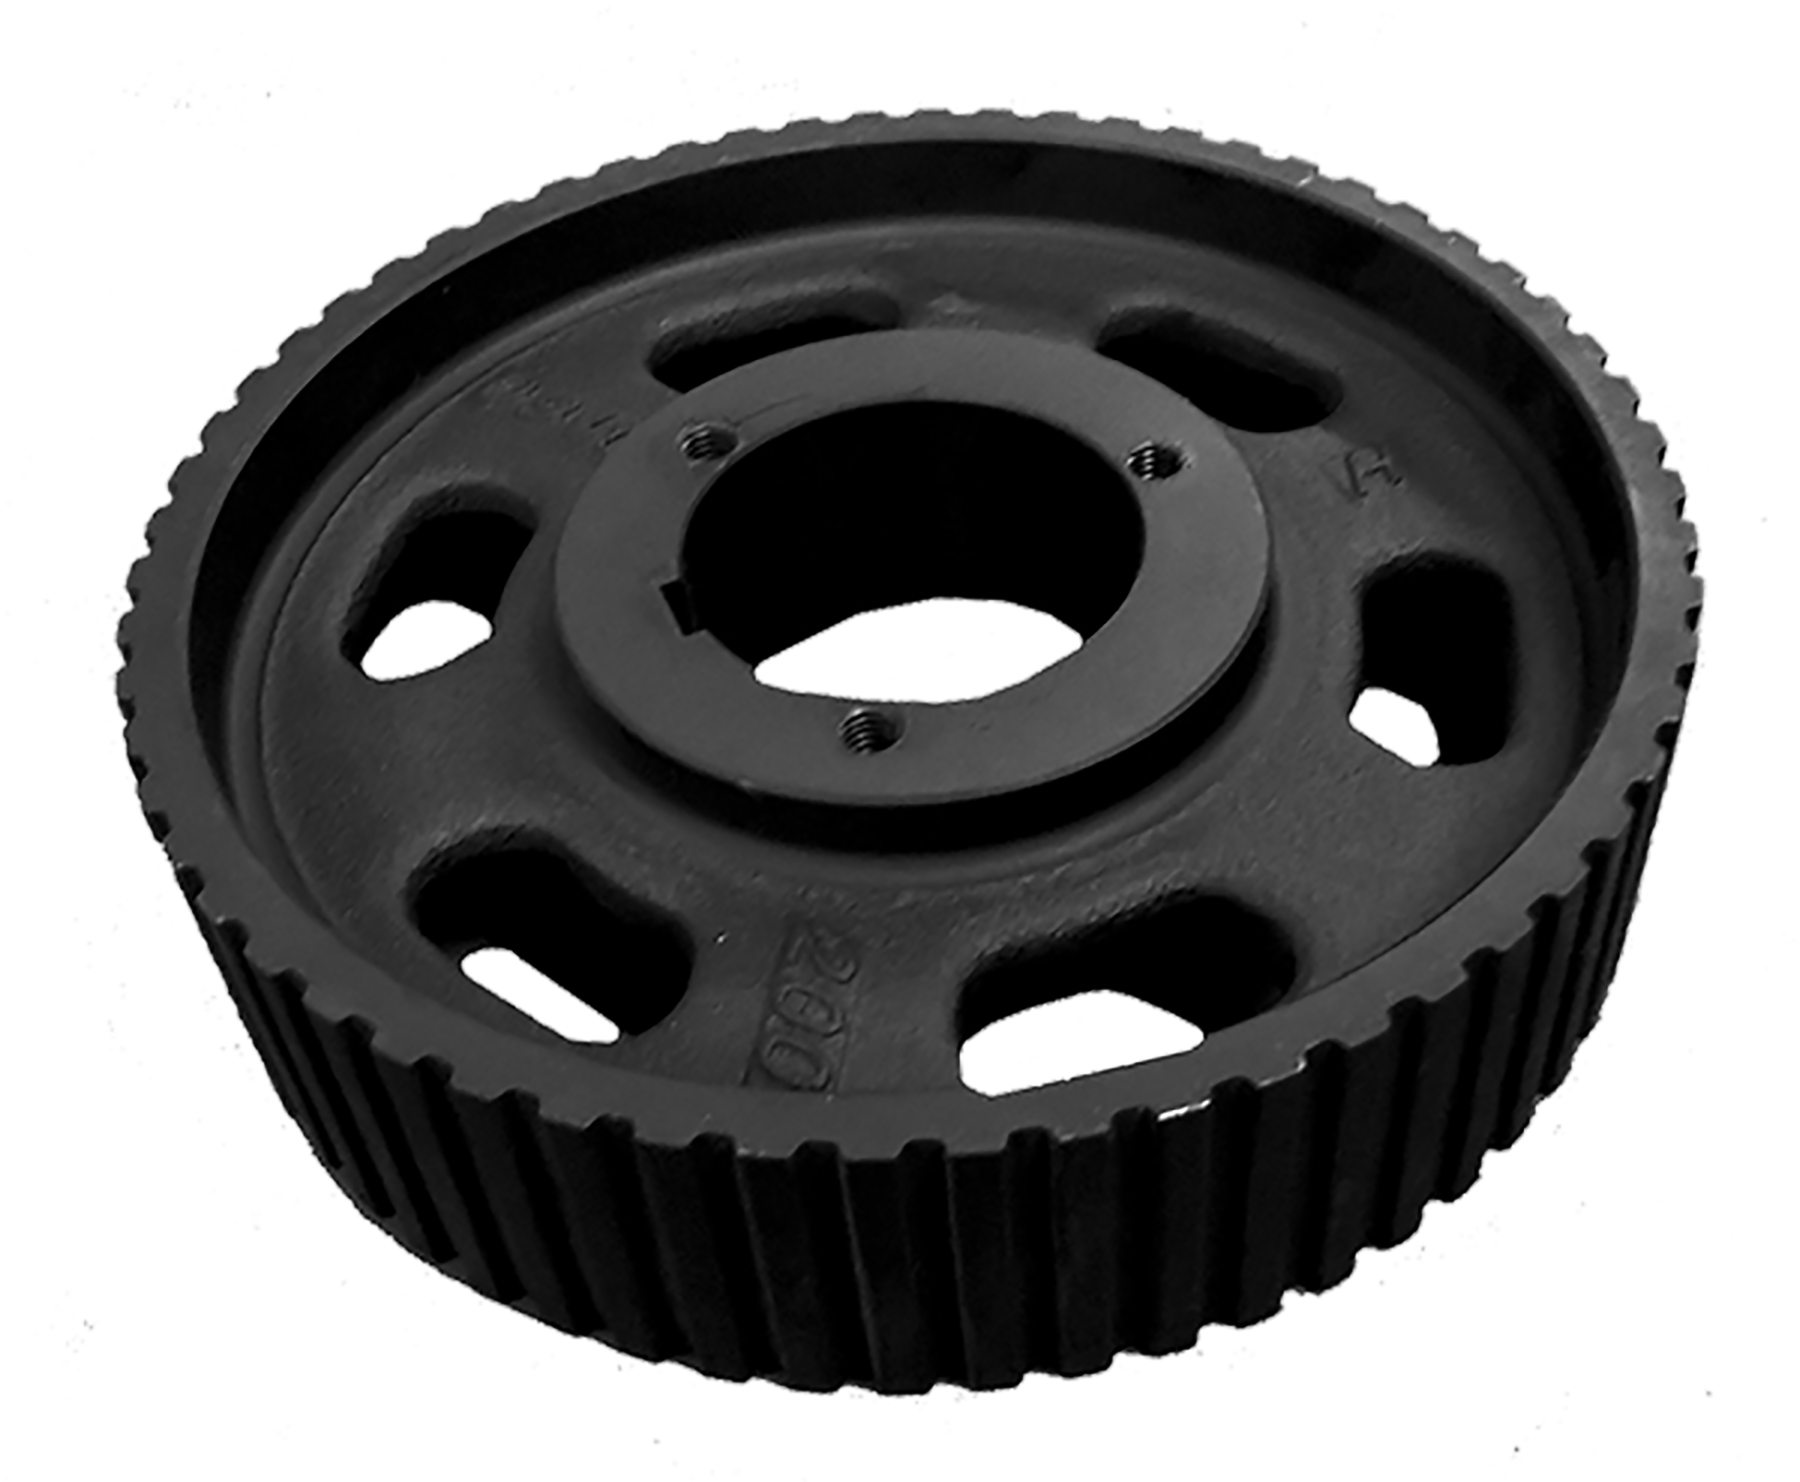 28HP200 - Cast Iron Imperial Pitch Pulleys